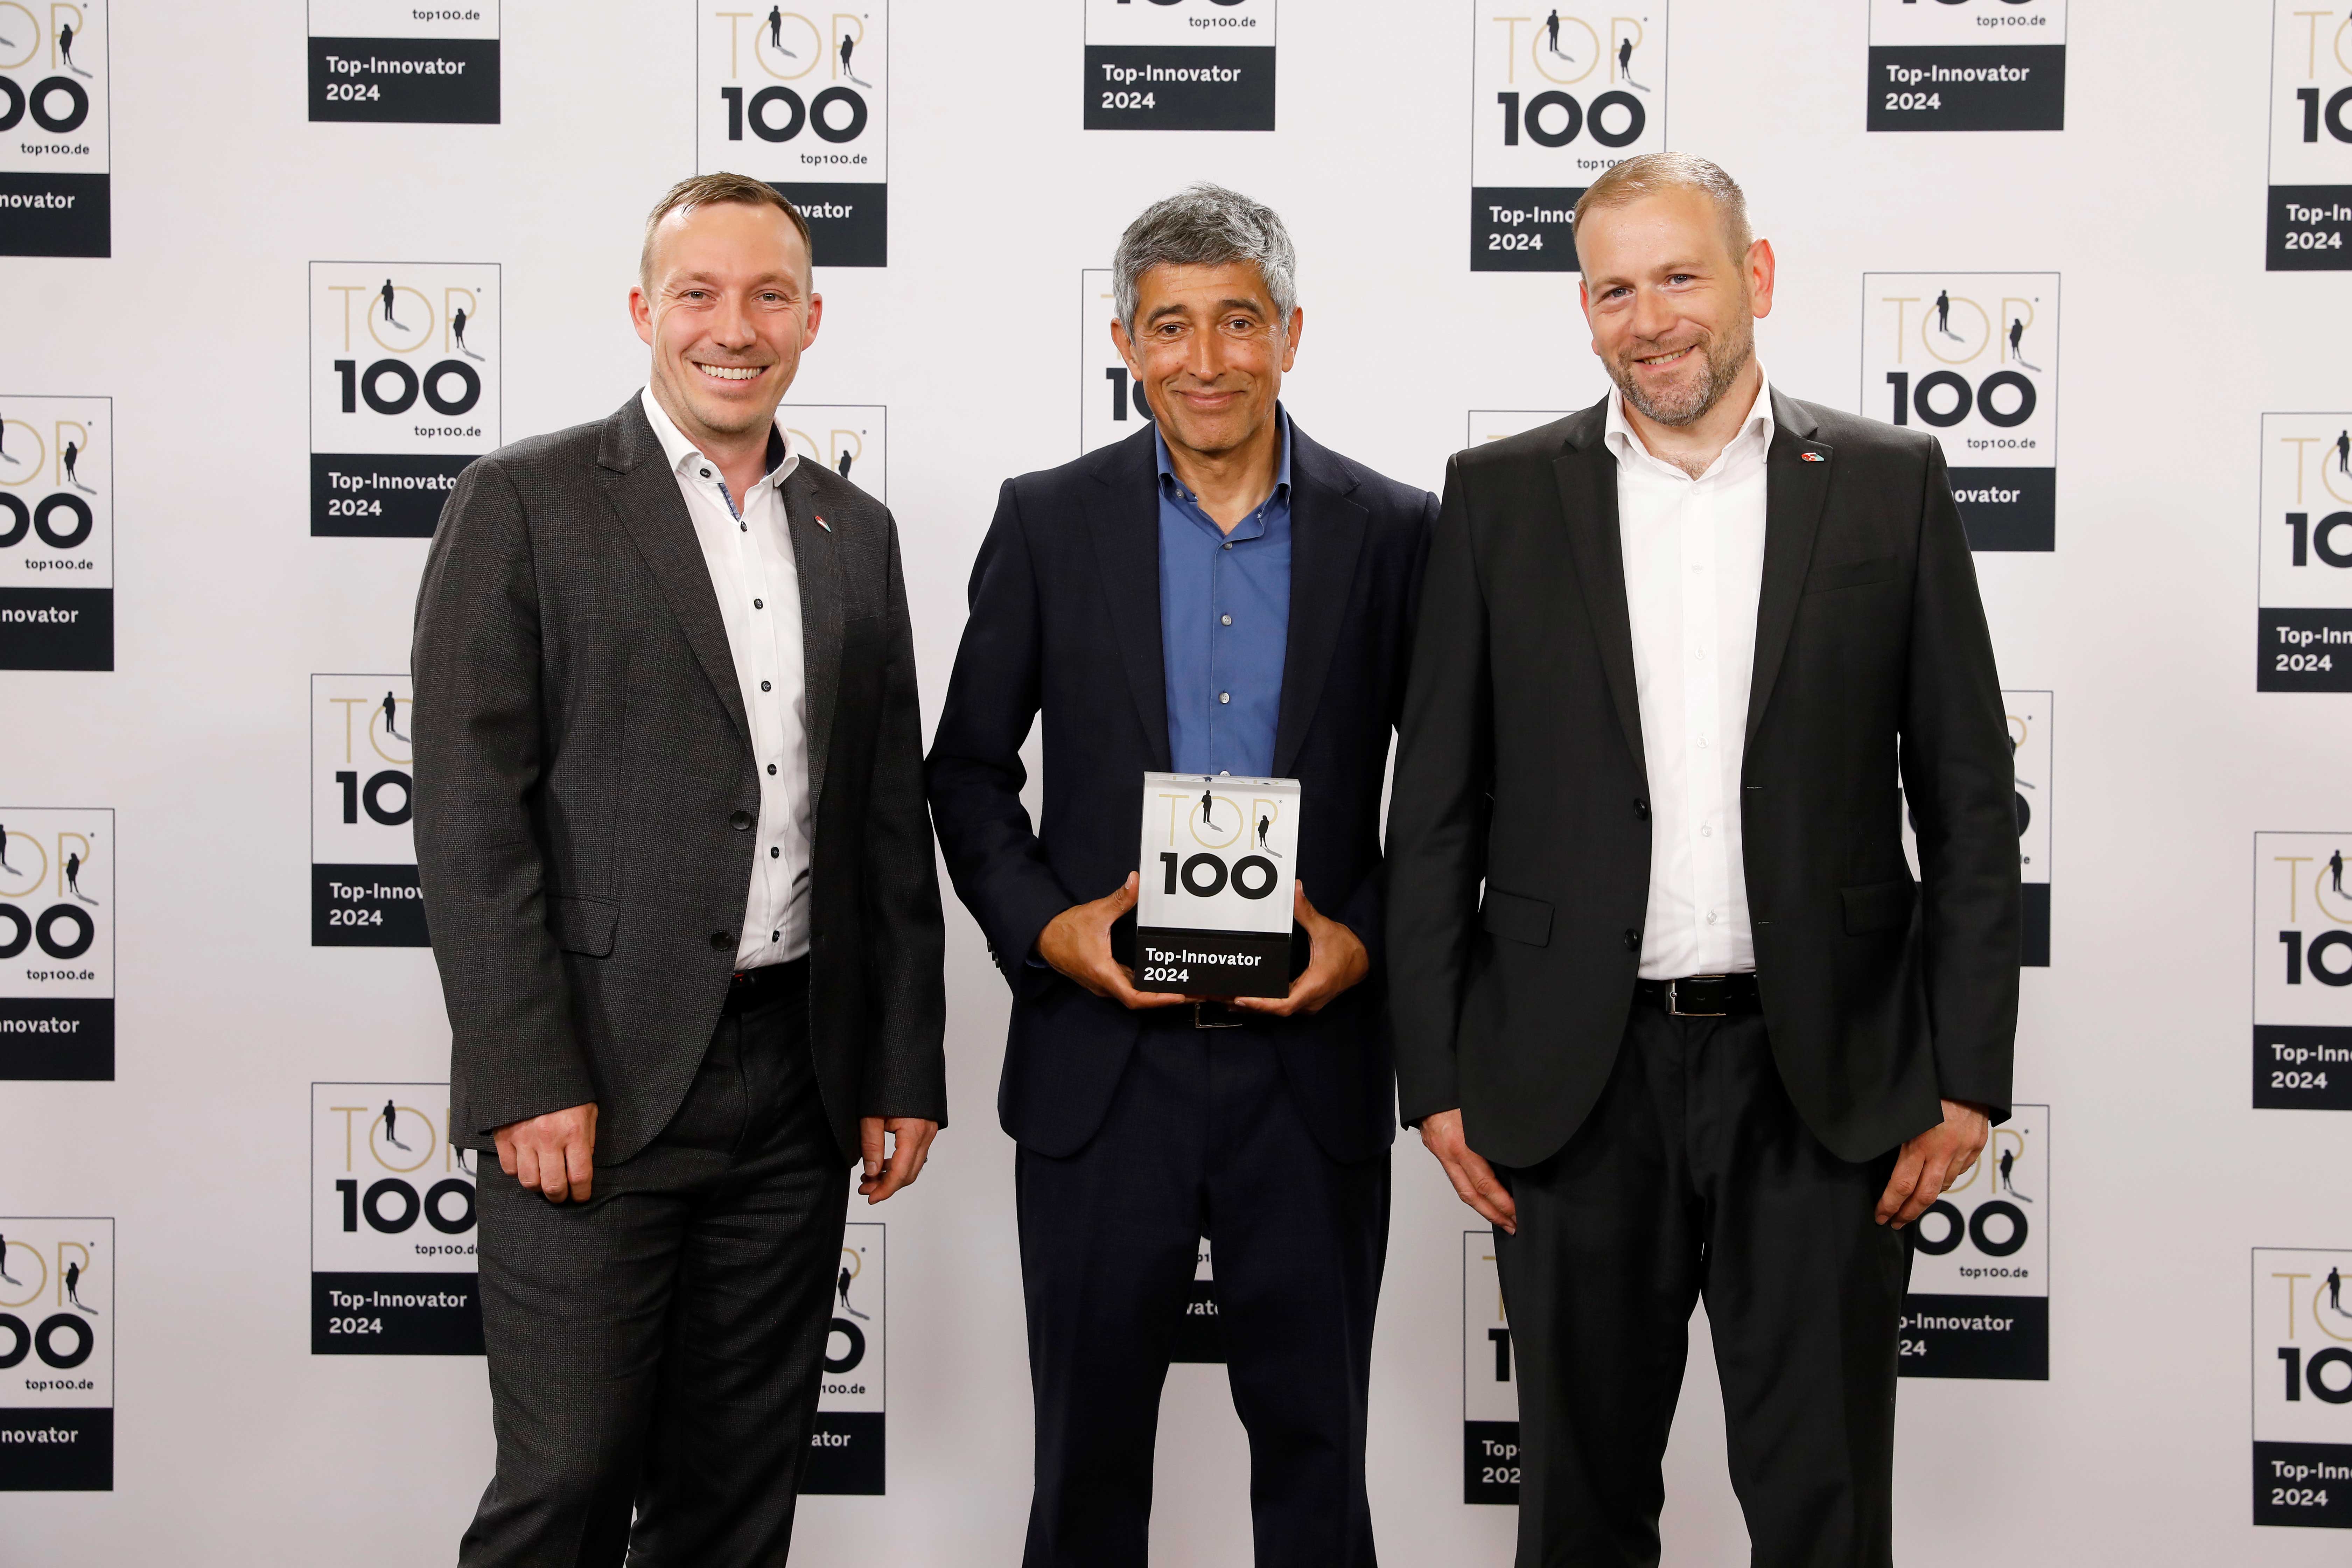 Three men in businesss suits are standing in front of a photo wall. All three are smiling. The man in the middle holds a TOP 100 trophy. In the background are several TOP 100 logos printed on to the wall.